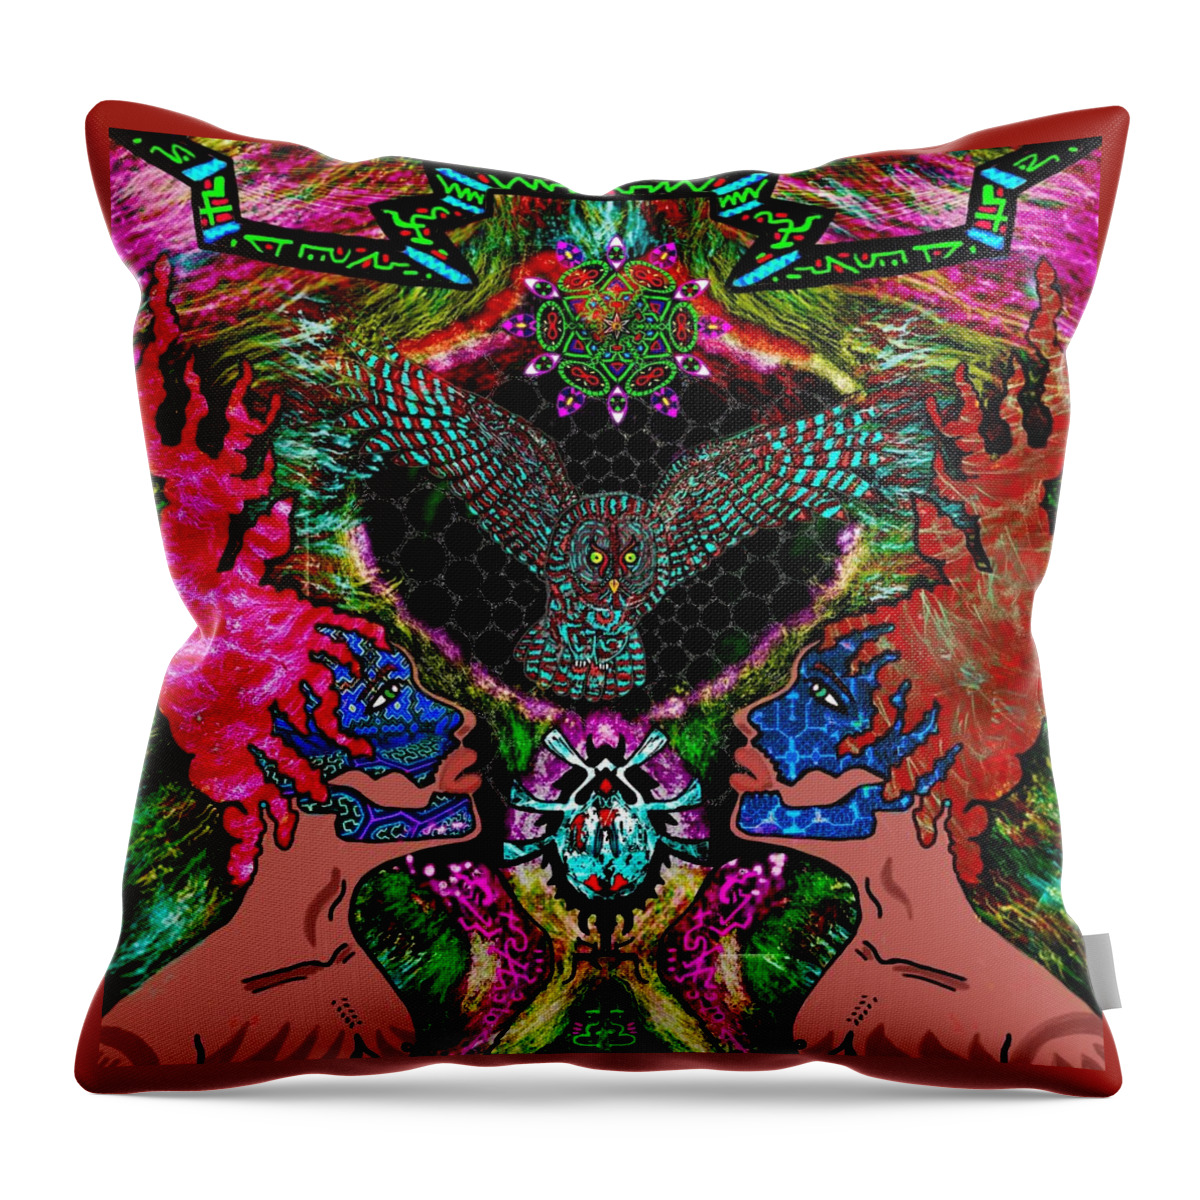 Owl Throw Pillow featuring the digital art Owl Spirit Contemplation by Myztico Campo